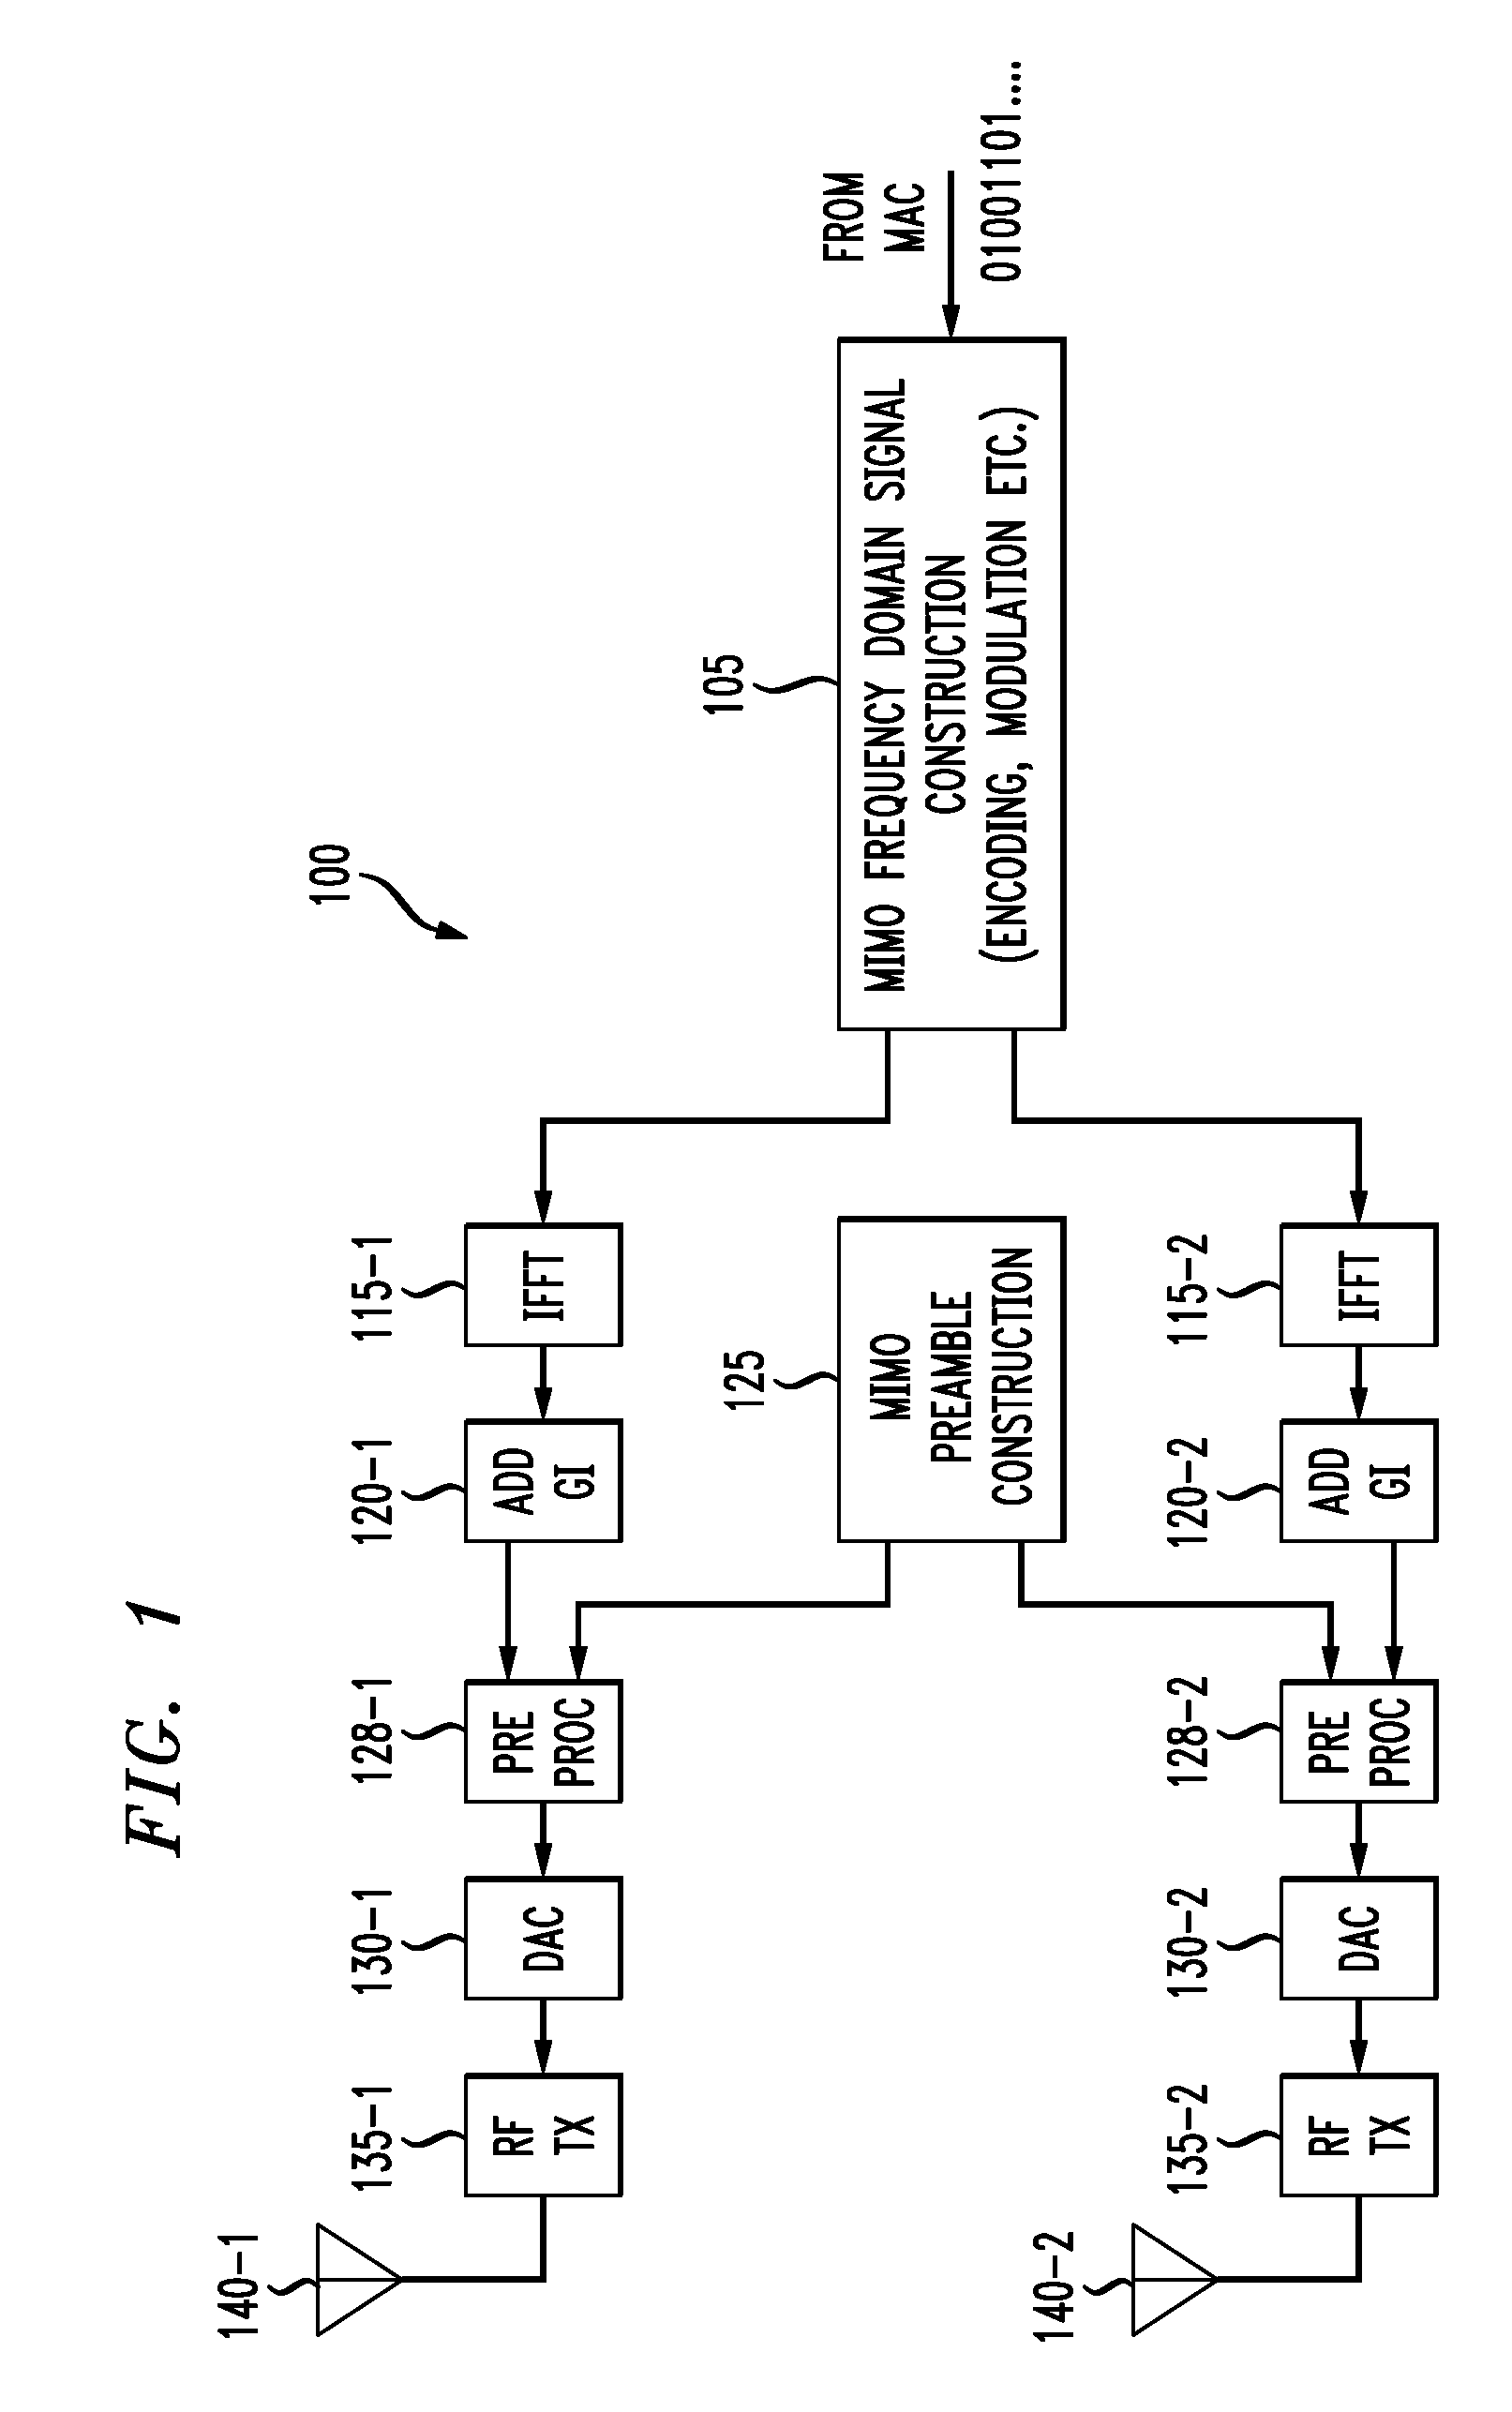 Method and apparatus for improved short preamble formats in a multiple antenna communication system